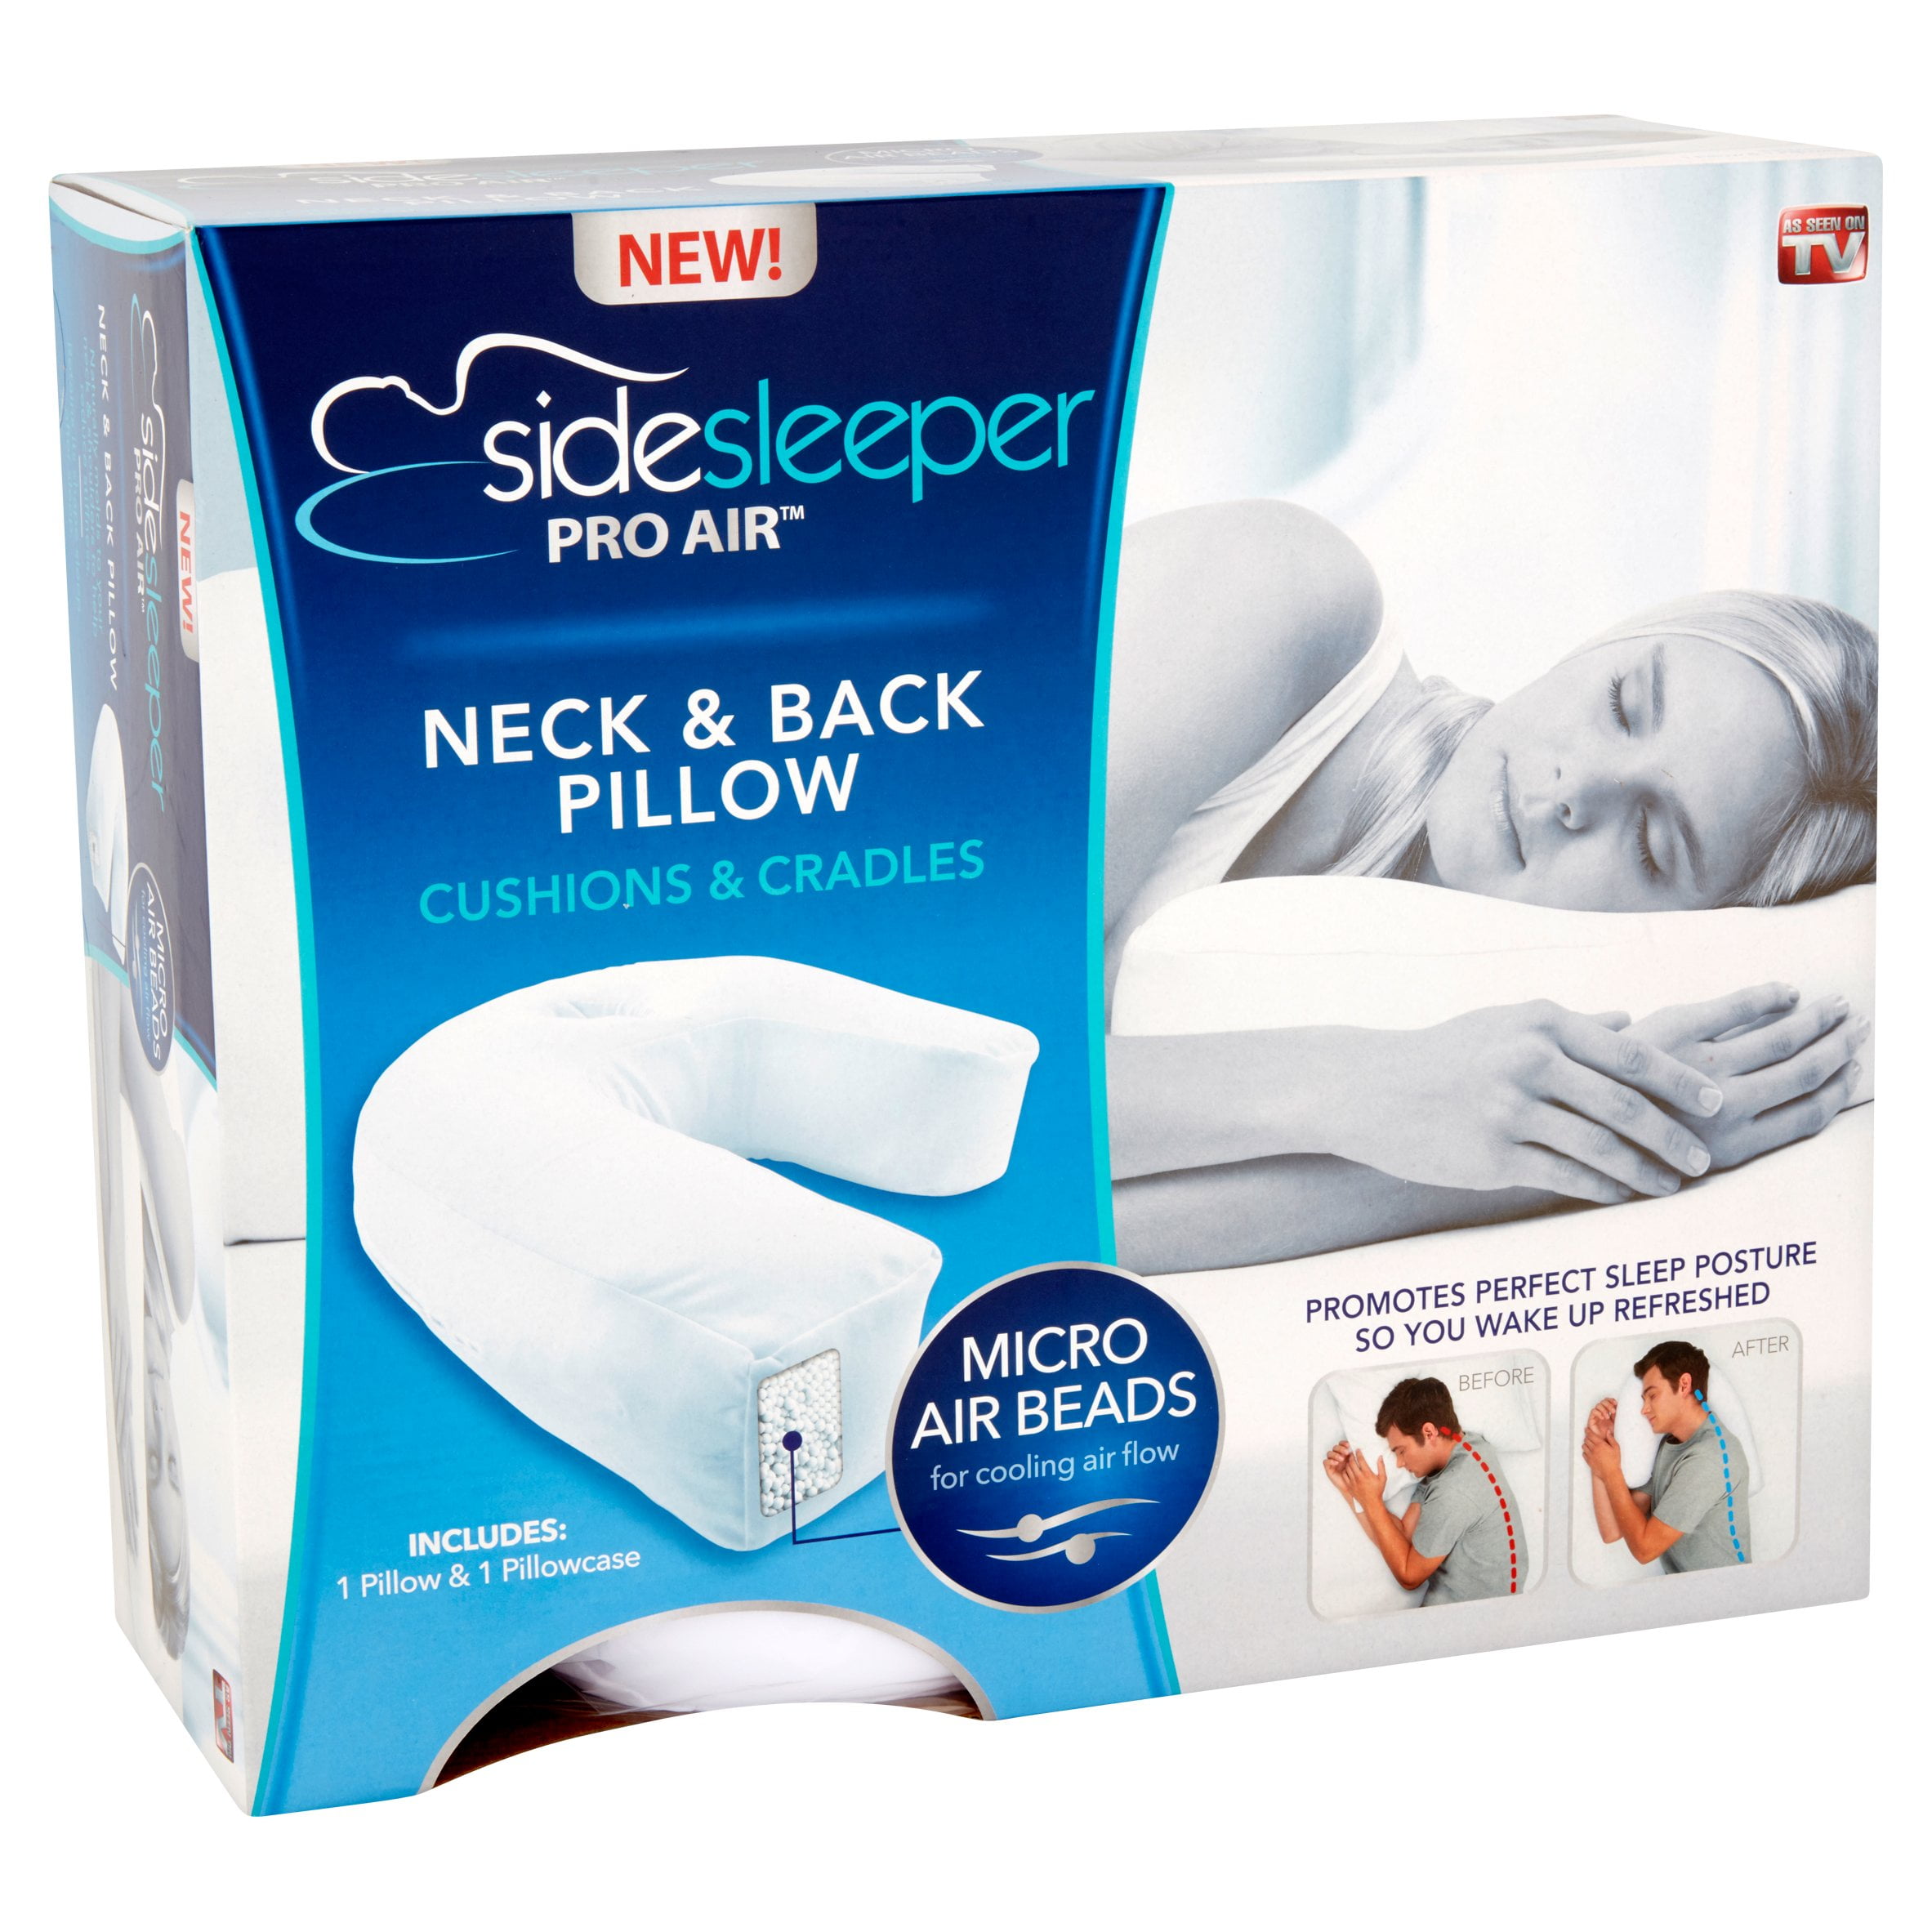 neck and back pillow